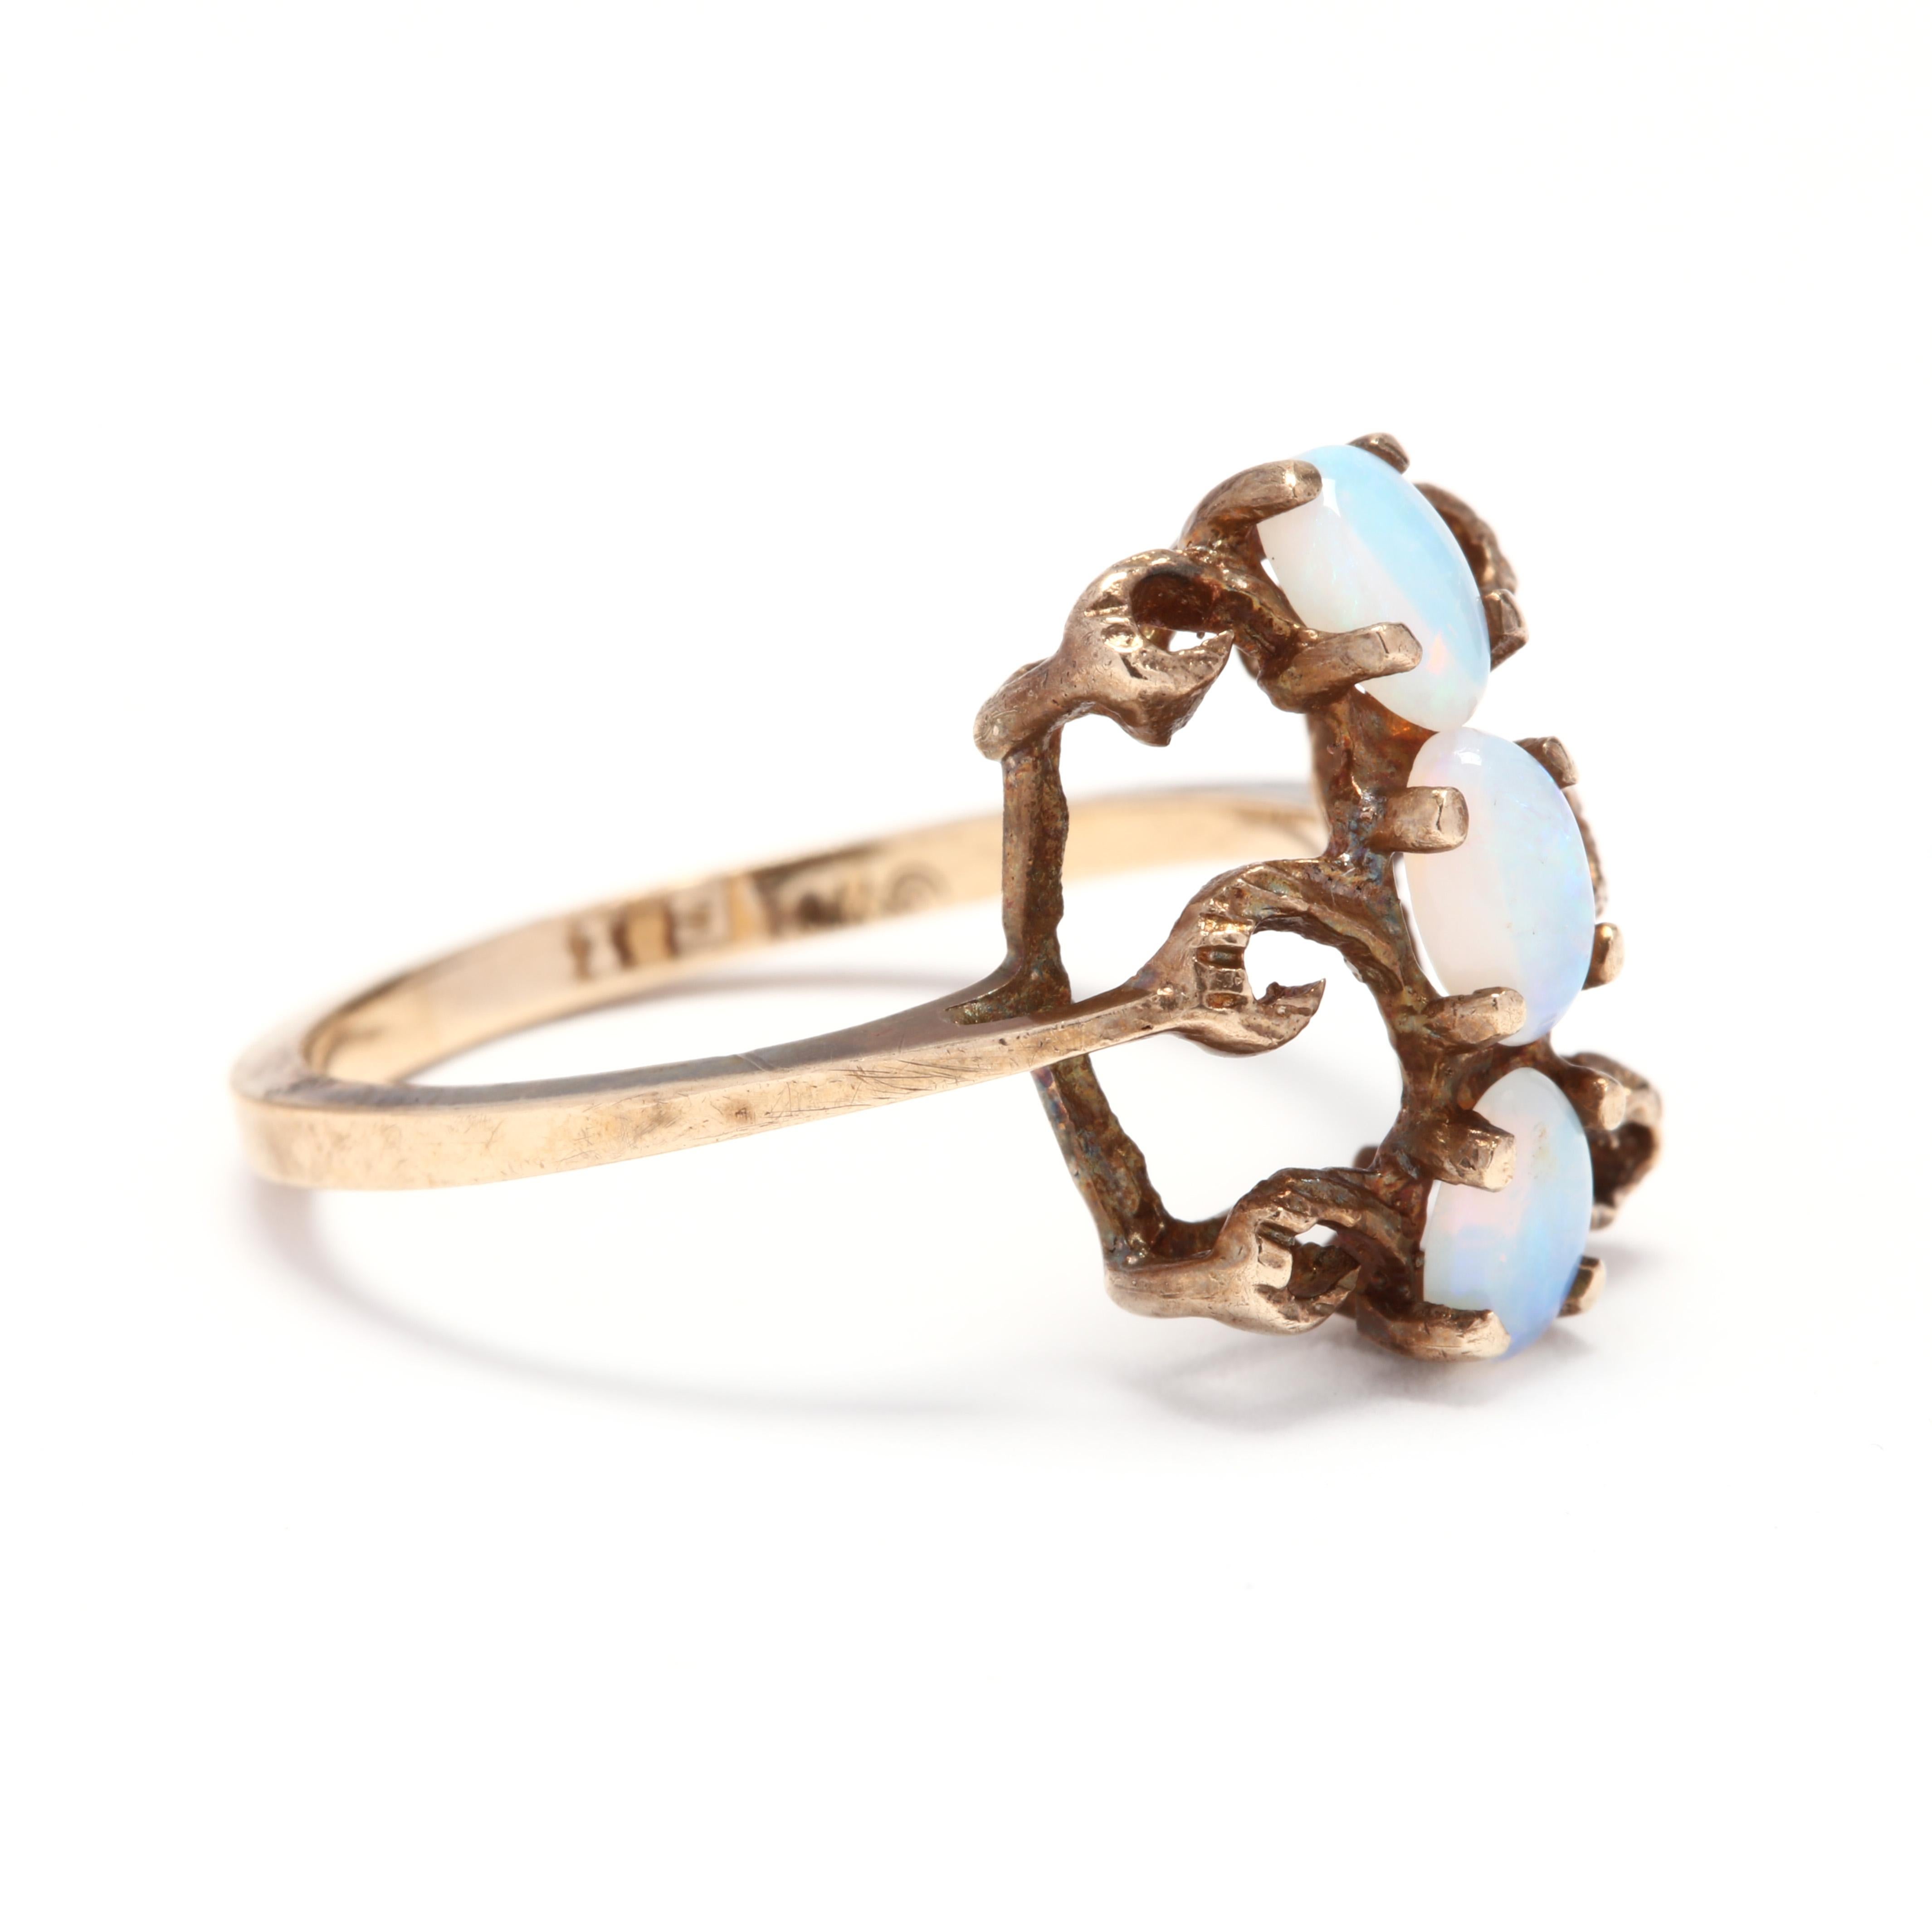 A vintage 10 karat yellow gold and opal statement ring. This ring features a rectangular design with three oval cabochon opals set in a vertical line with swirl motif detailing and a thin shank.

Stones:
- opal, 3 stone
- oval cabochon
- 5 x 3.25